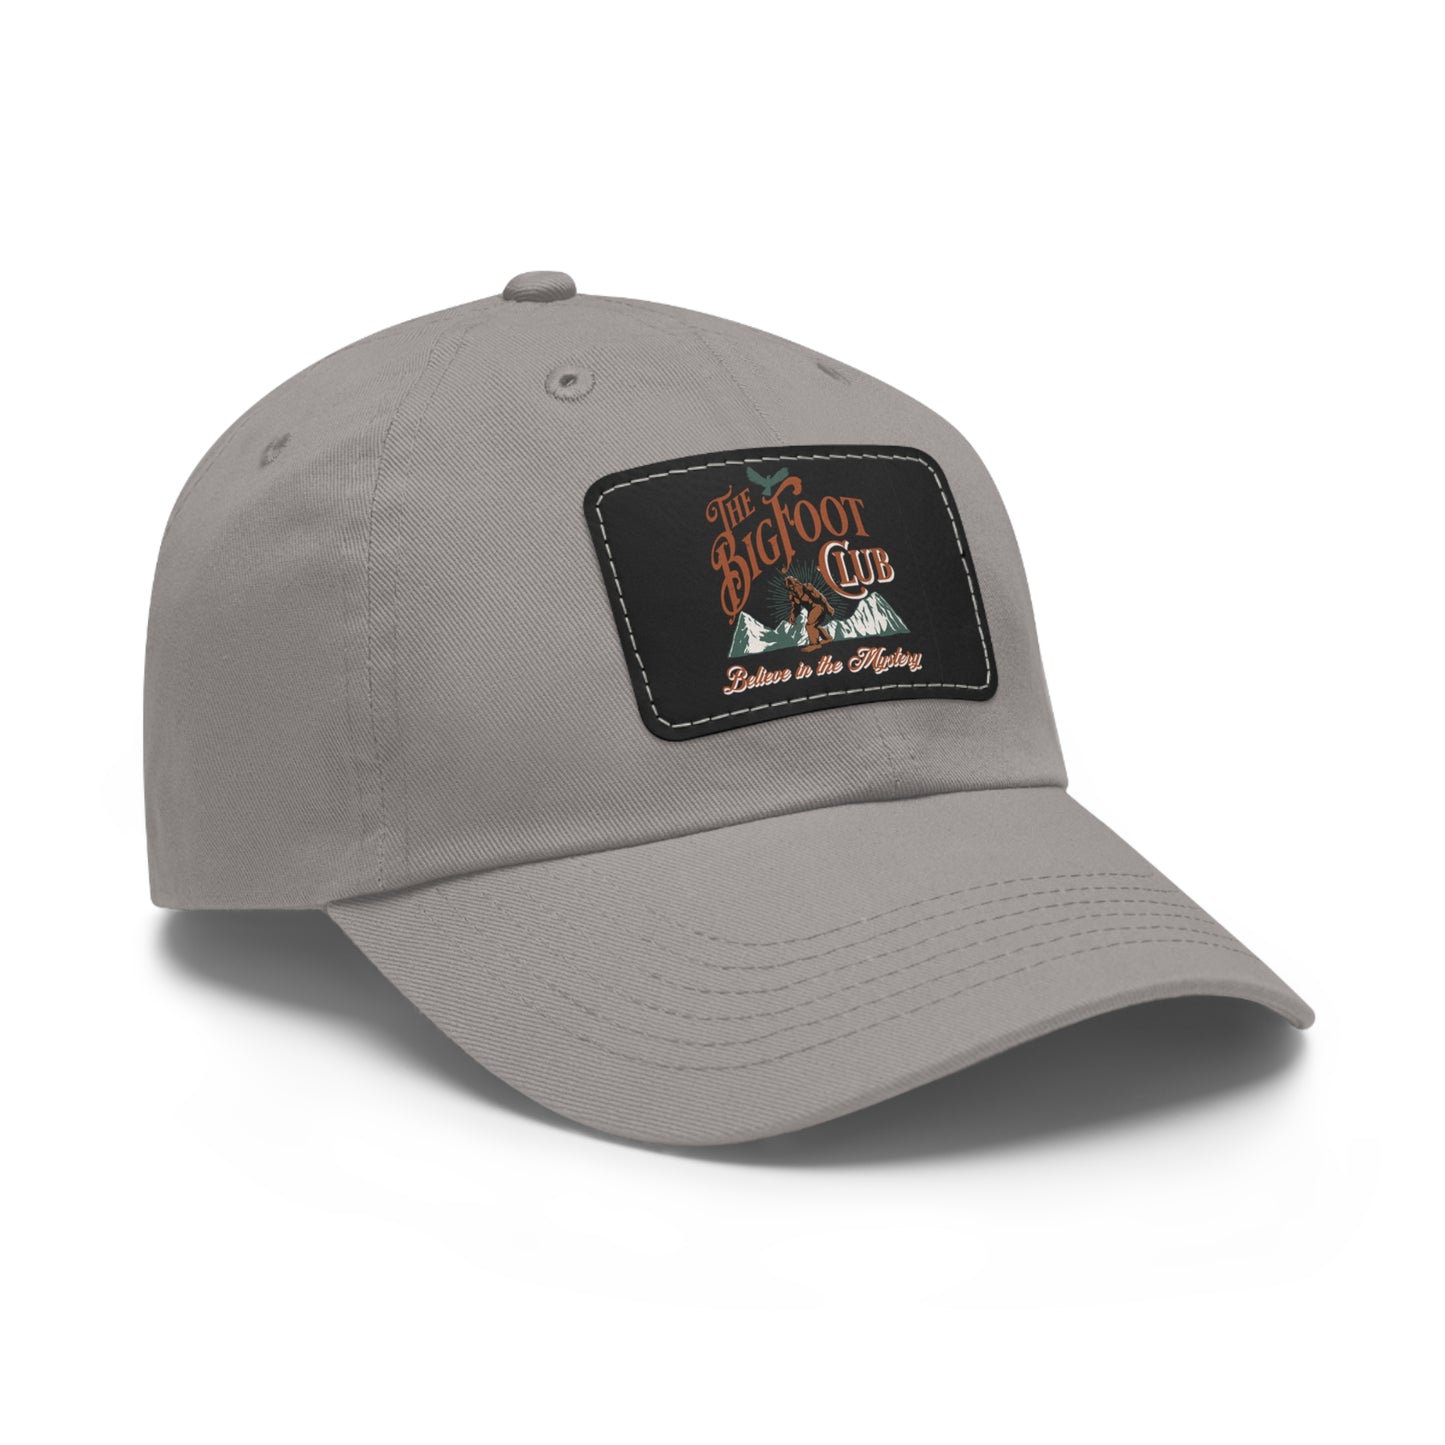 The Bigfoot Club Hat with Leather Patch for Everyone Sasquatch Yeti Clubs Gift Hunter